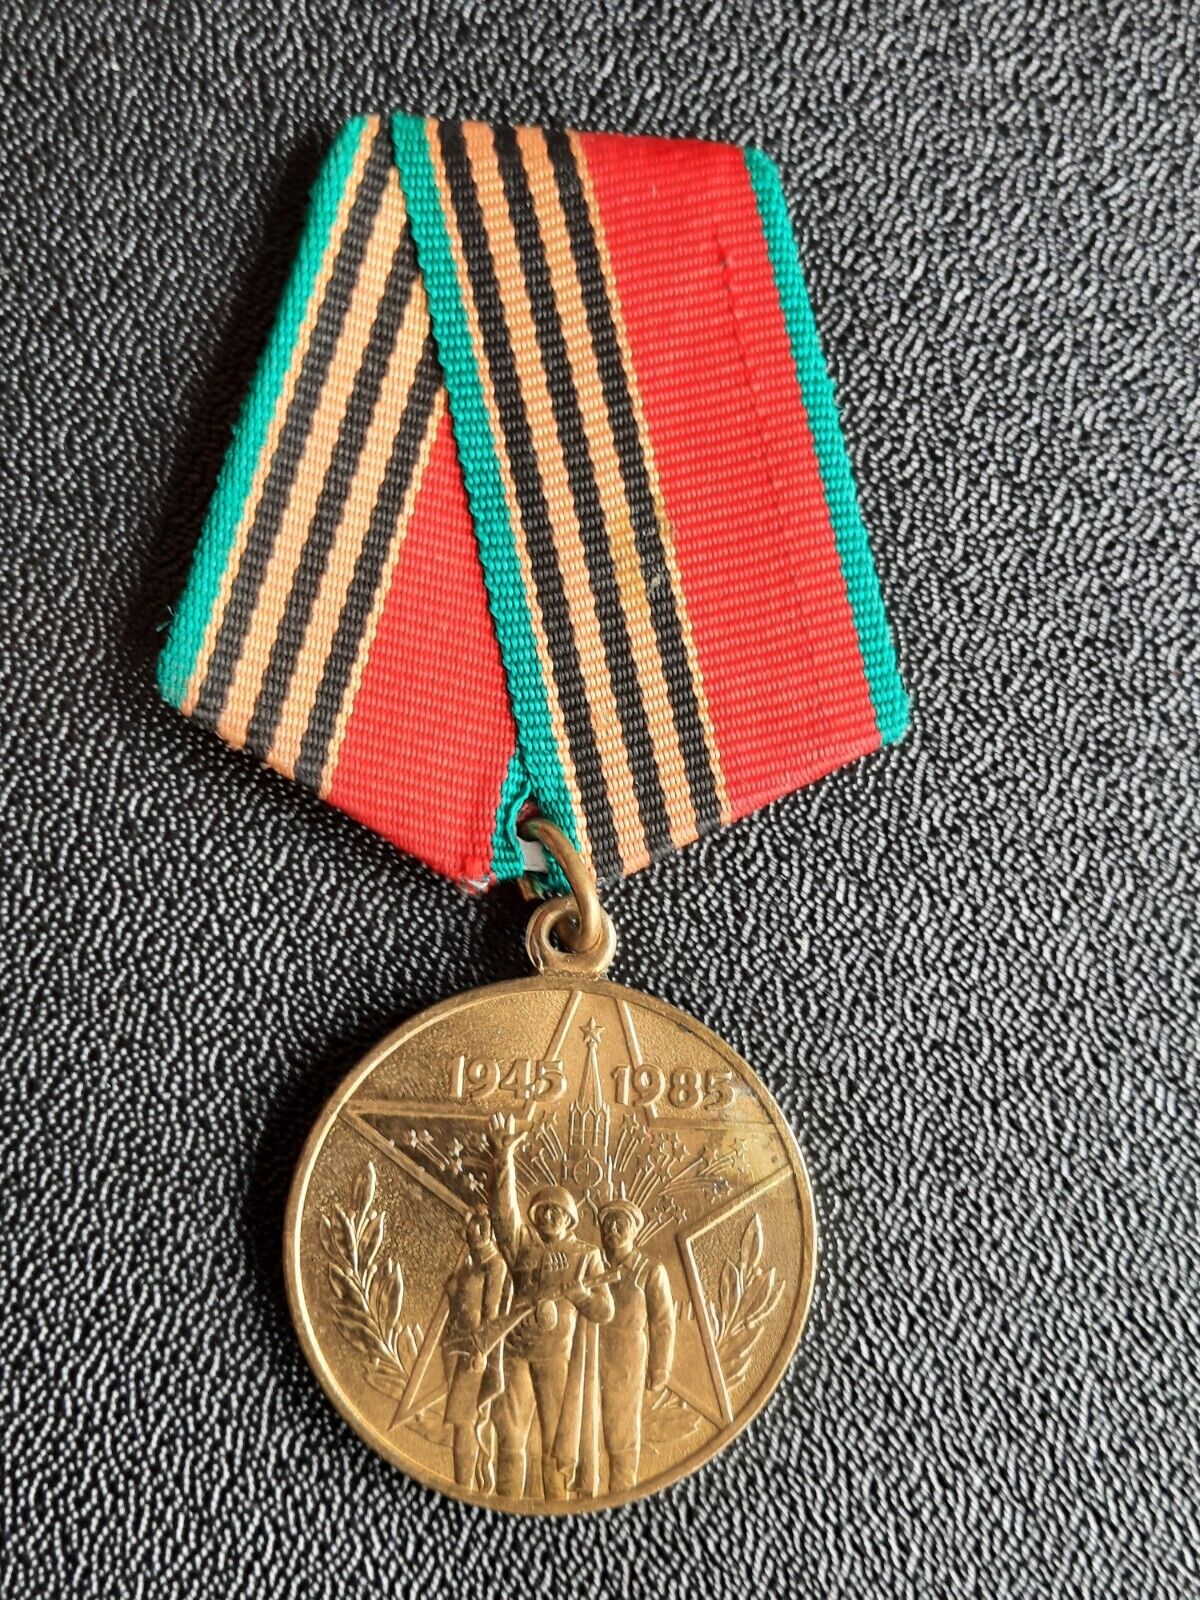 USSR medal 40 years of victory in the Great Patriotic War 1941-1945